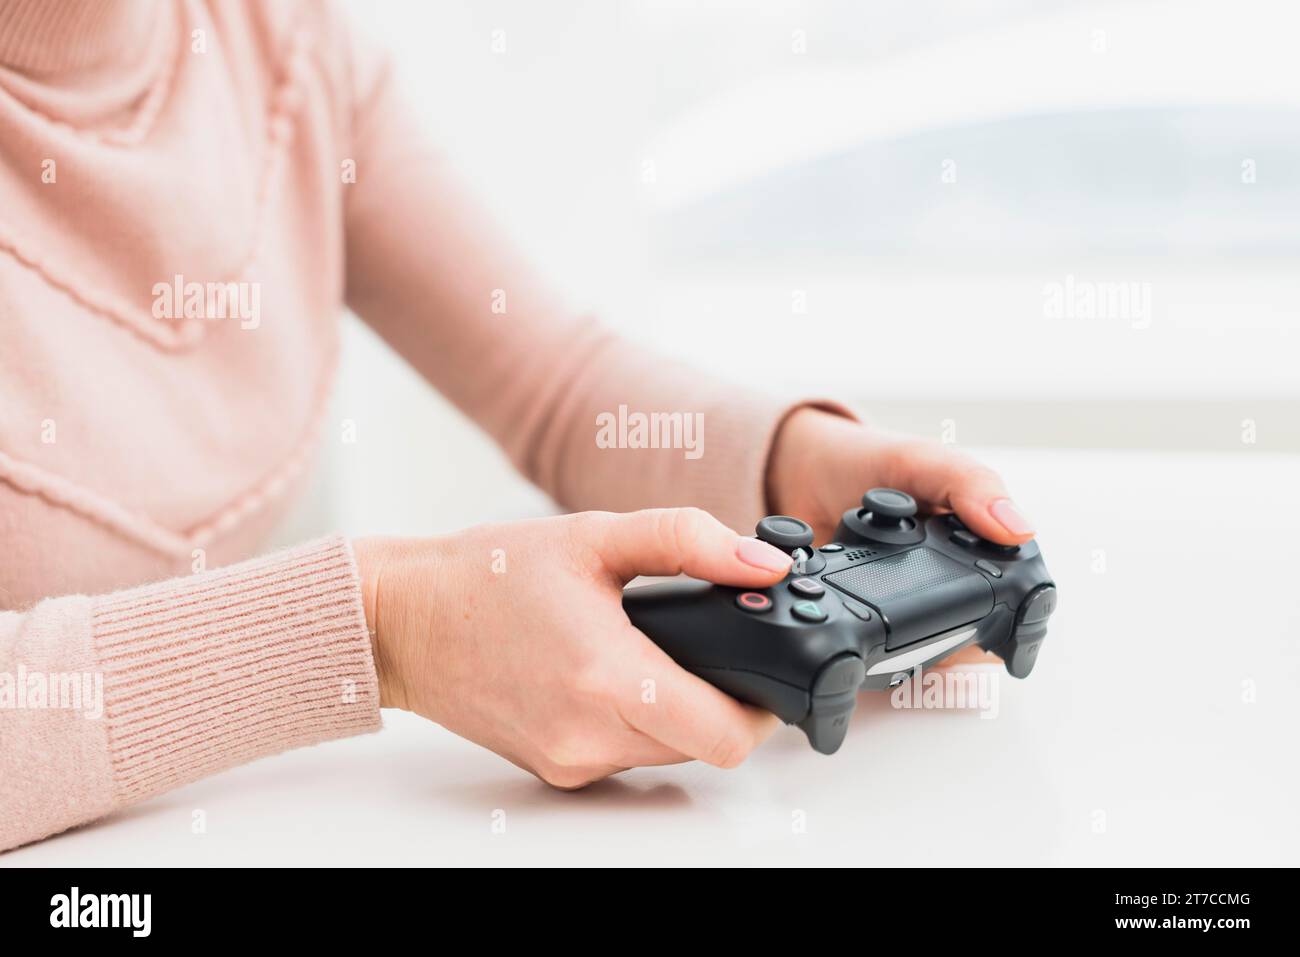 Woman pink clothes playing game console Stock Photo